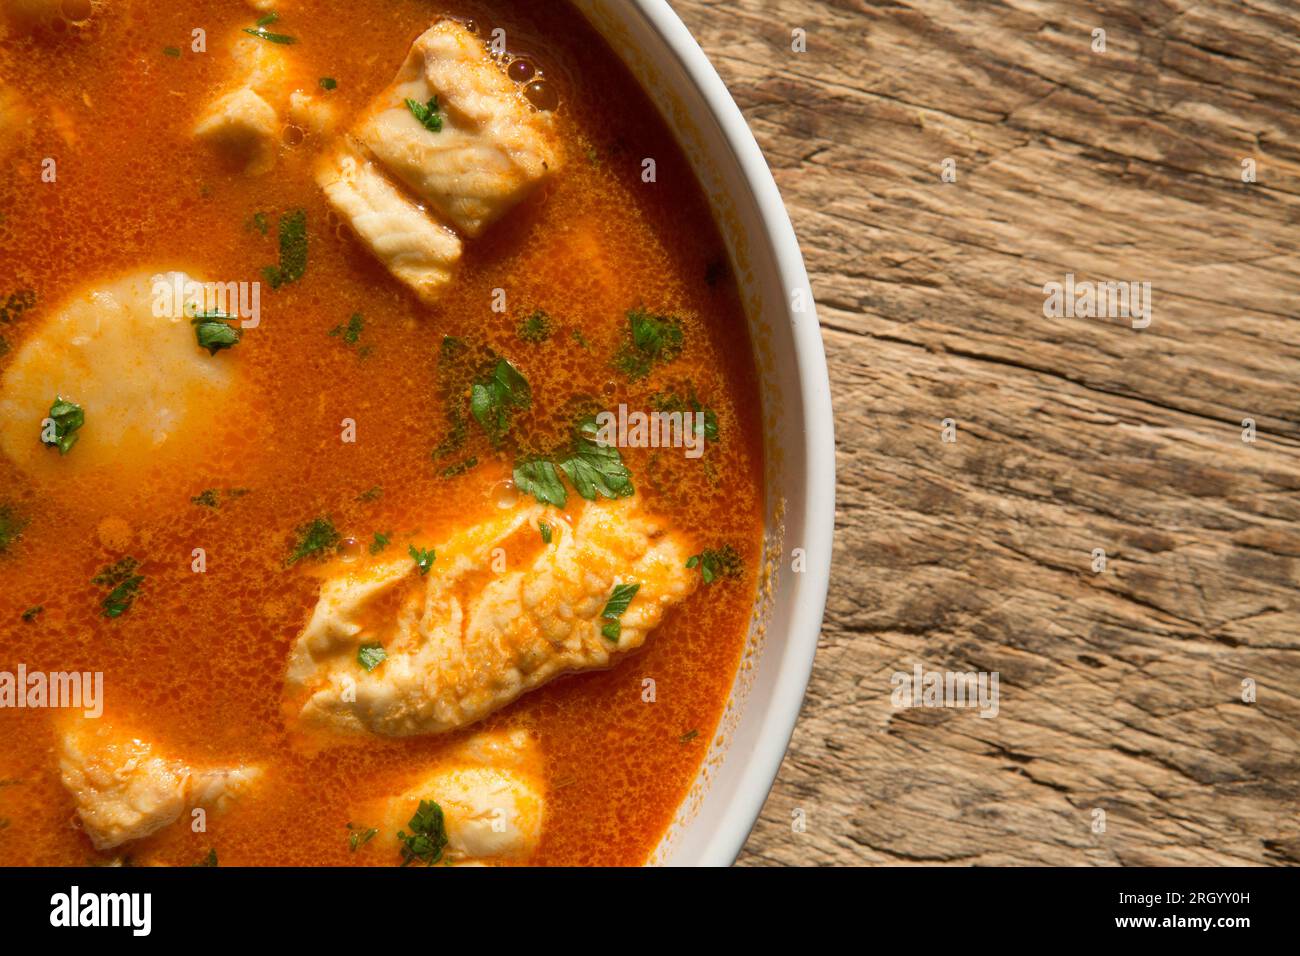 A bowl of fish stew or bouillabaisse, that has been made with king scallops, smooth hound, anglerfish also known as monkfish and gurnard fillets. Engl Stock Photo